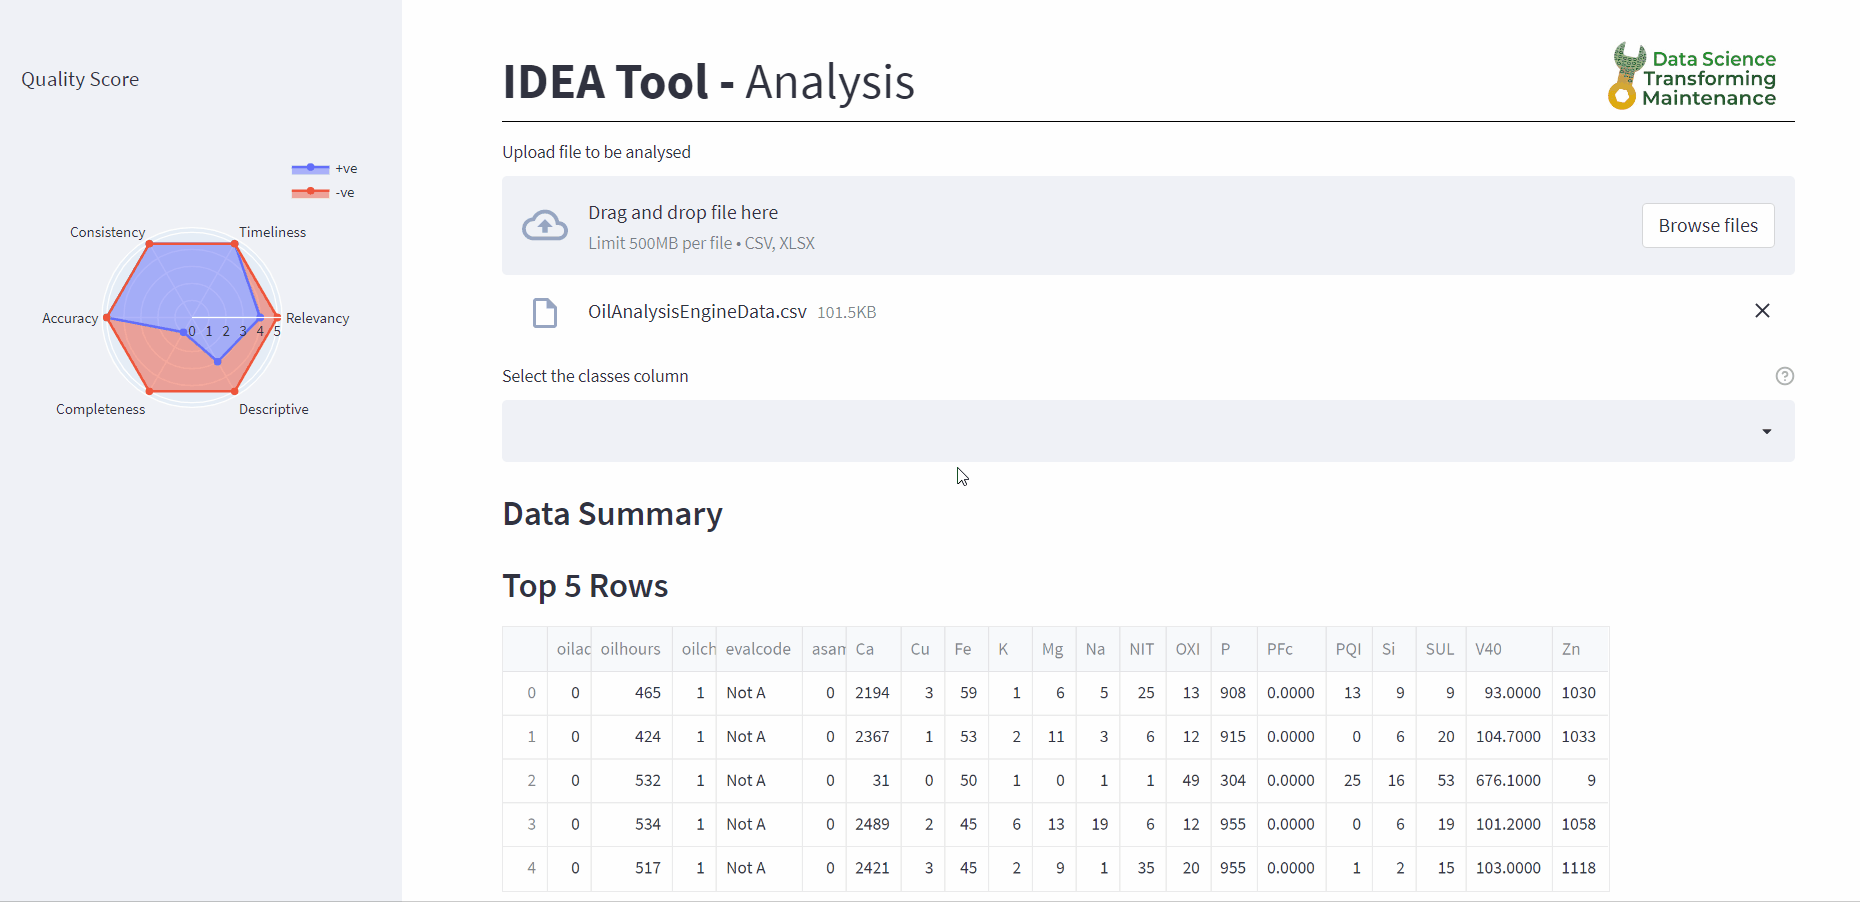 The new Streamlit version of the IDEA tool